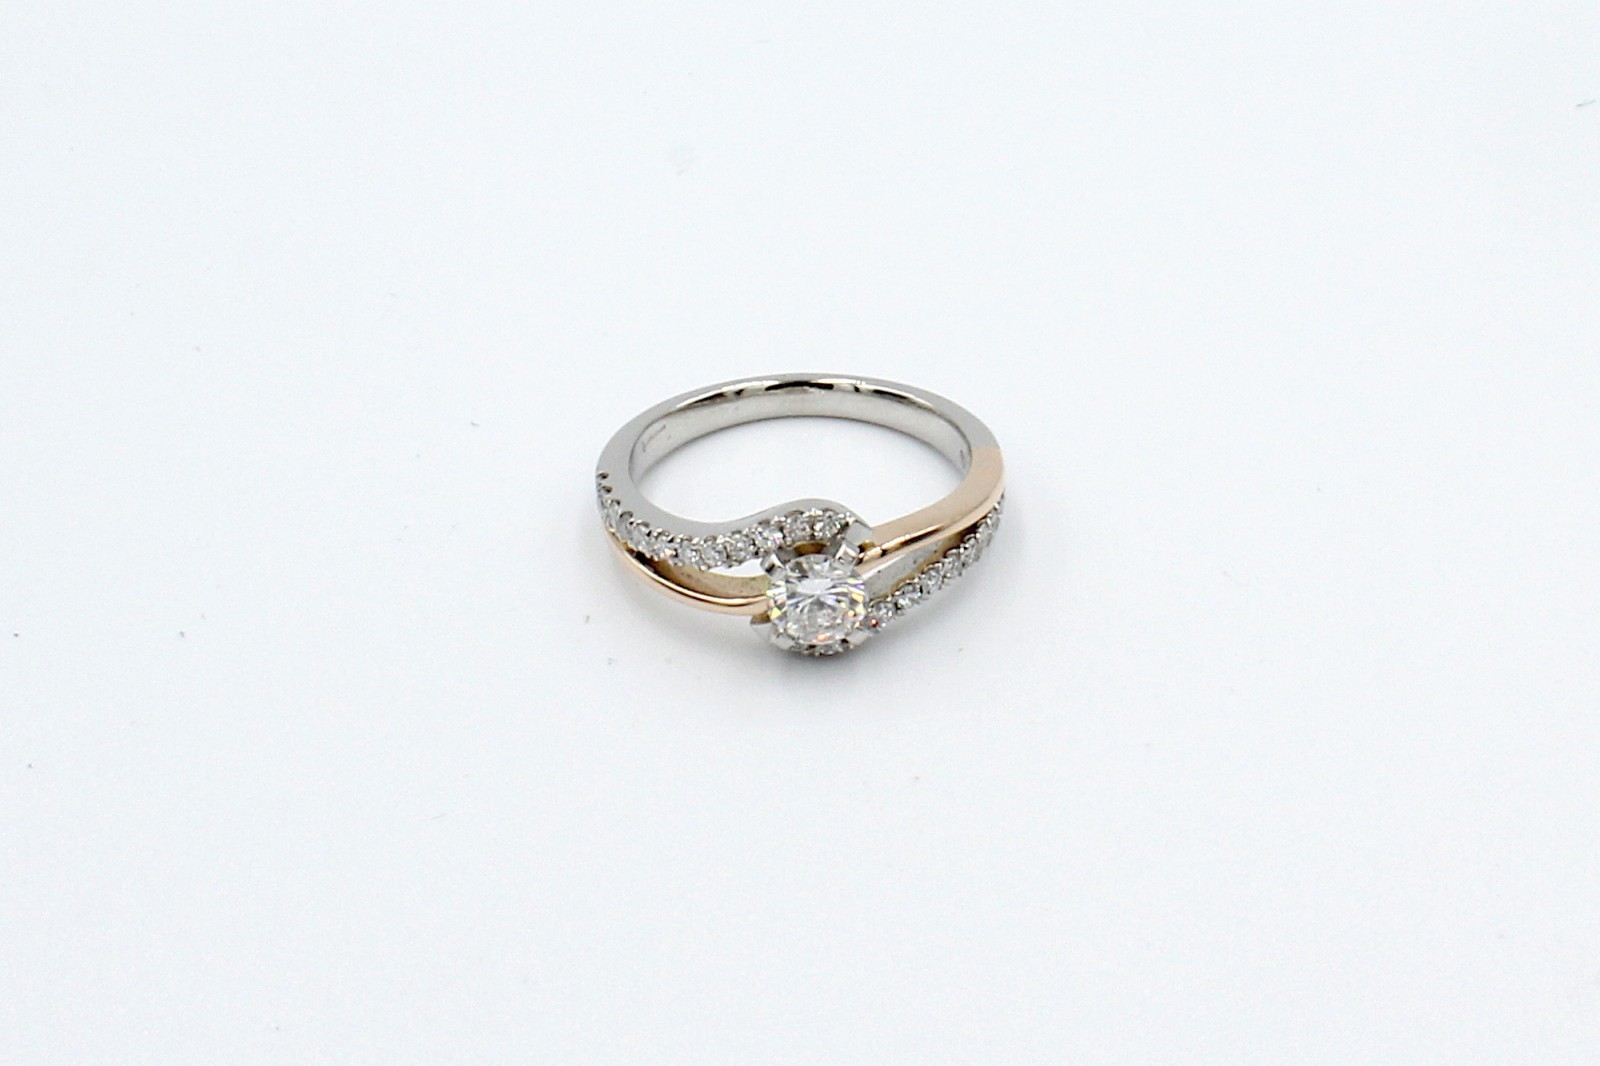 top view of a repaired engagement ring on a white background